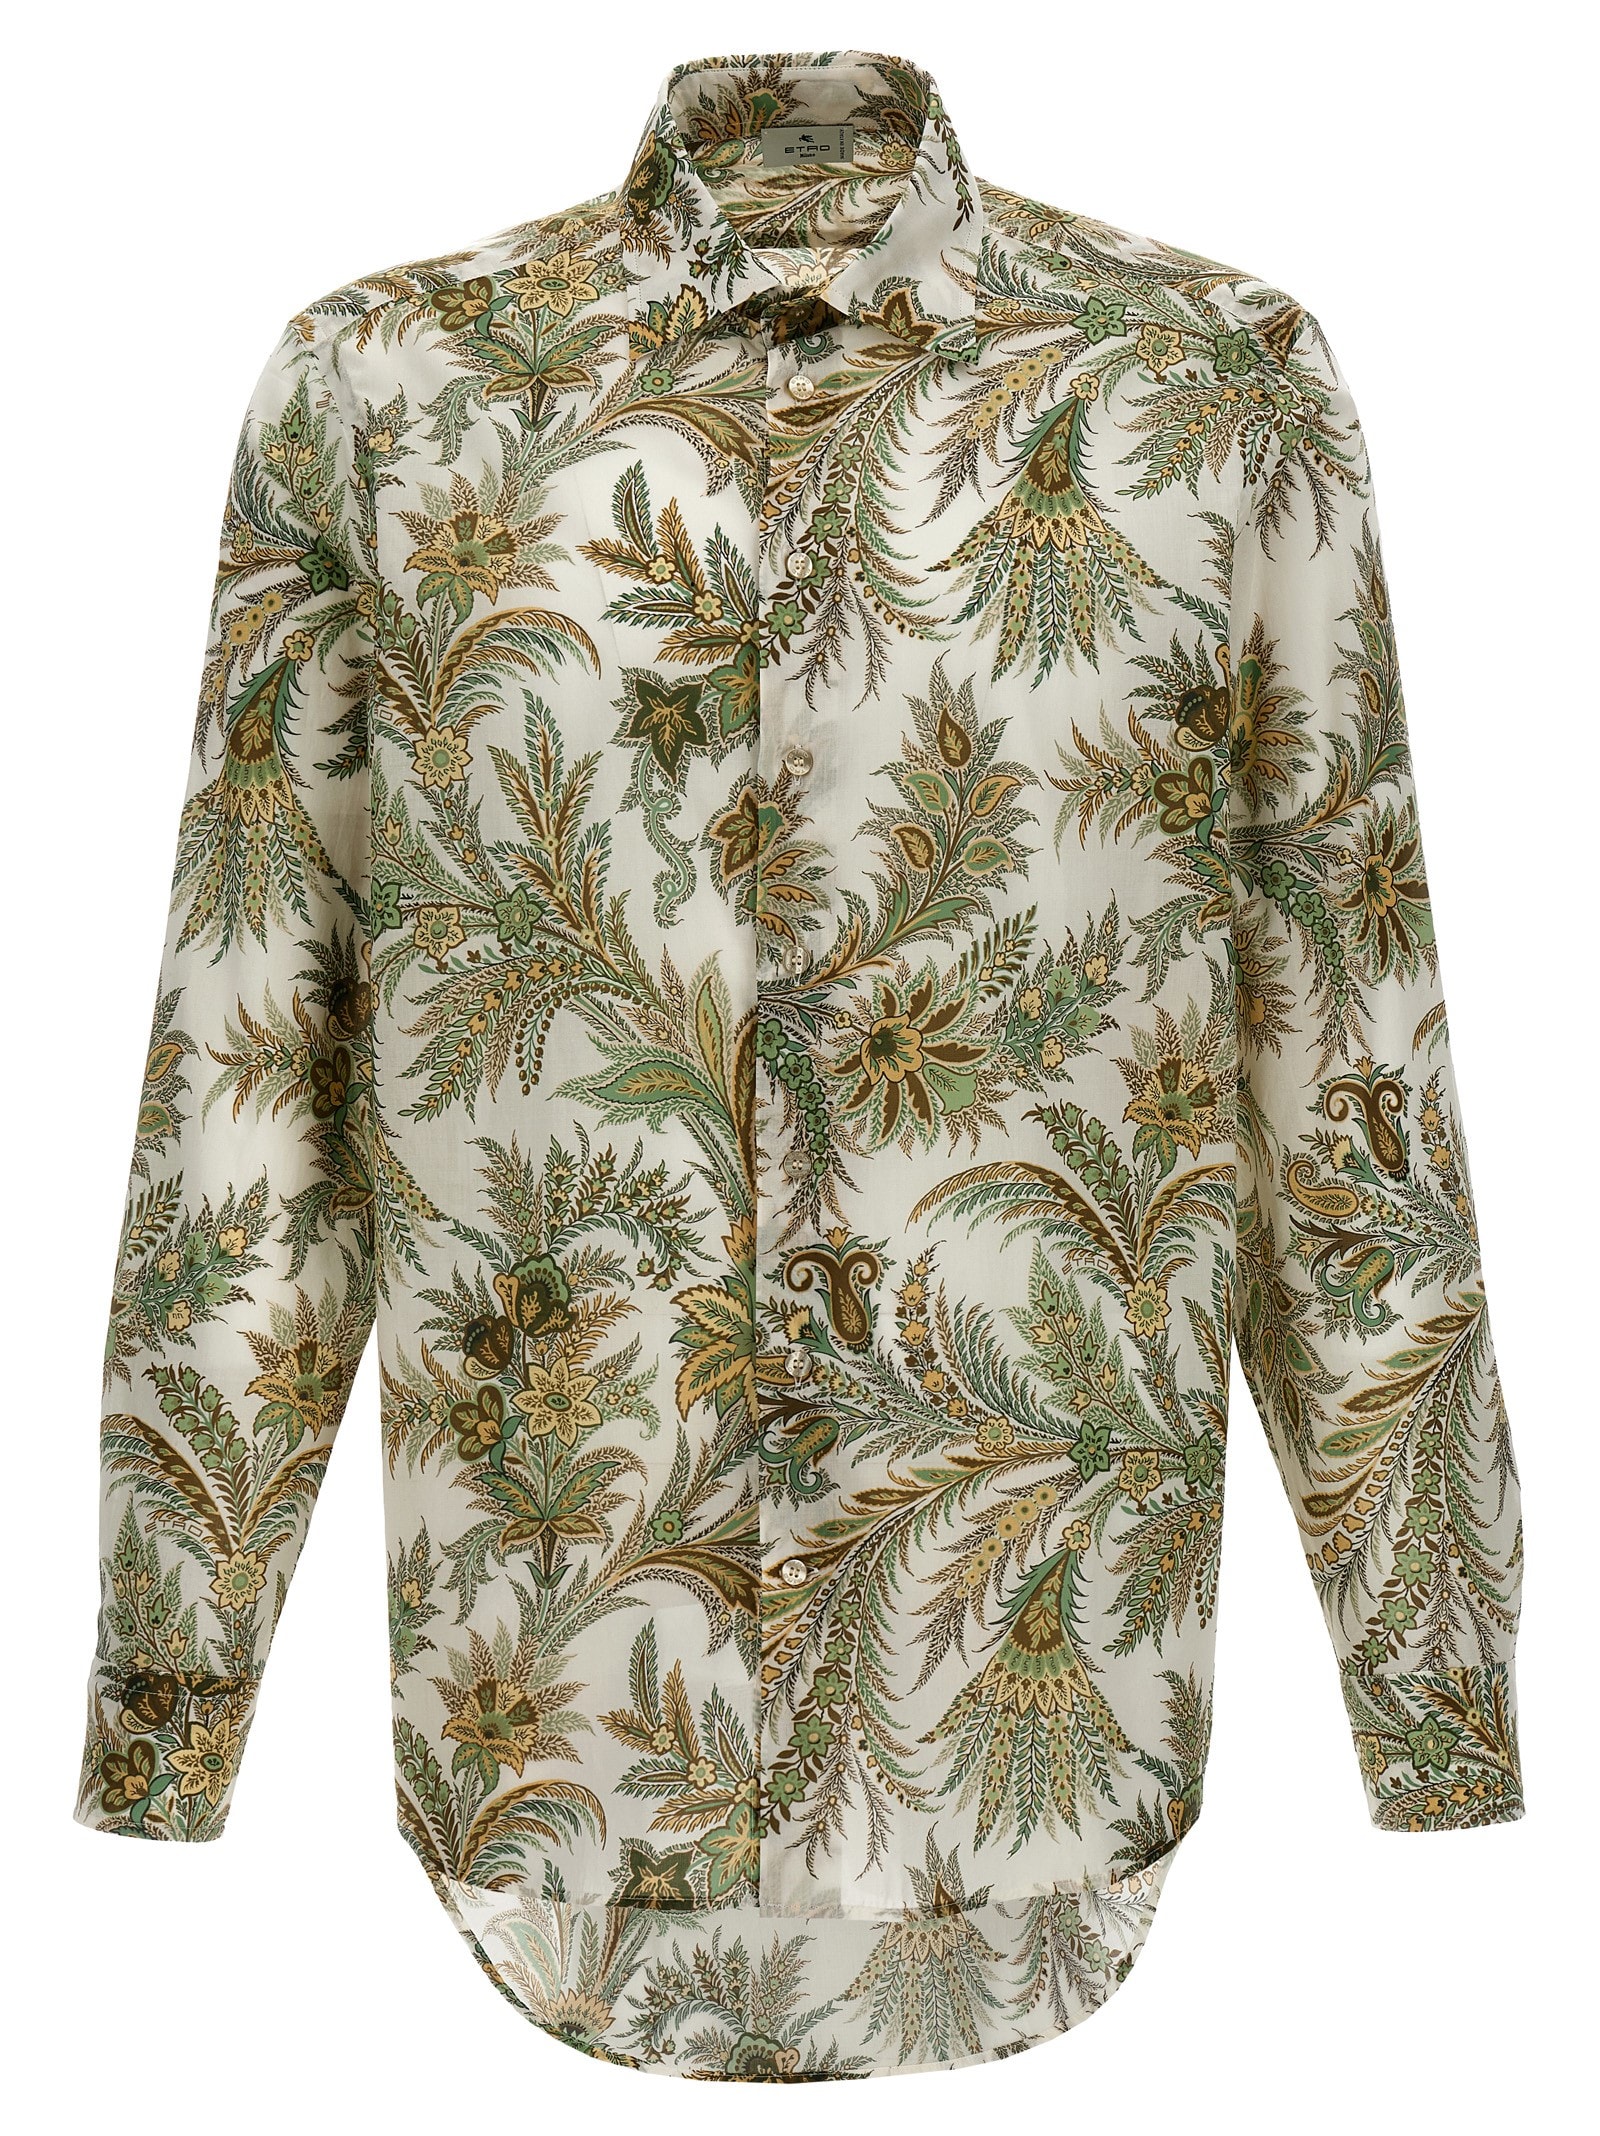 ETRO ALL-OVER PRINT SHIRT